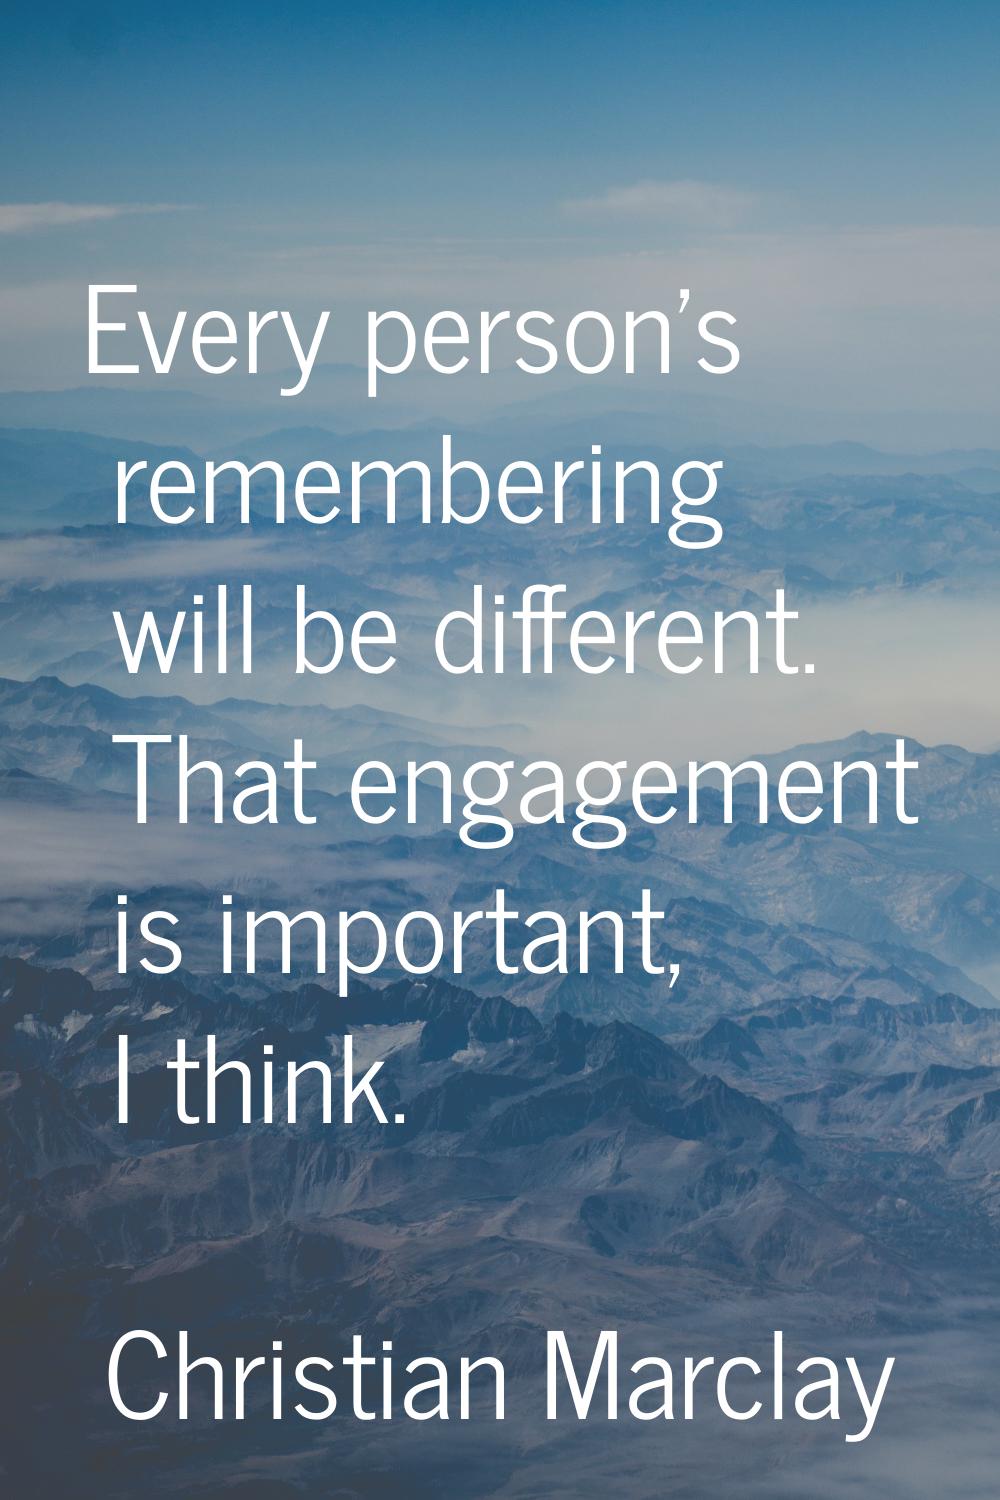 Every person's remembering will be different. That engagement is important, I think.